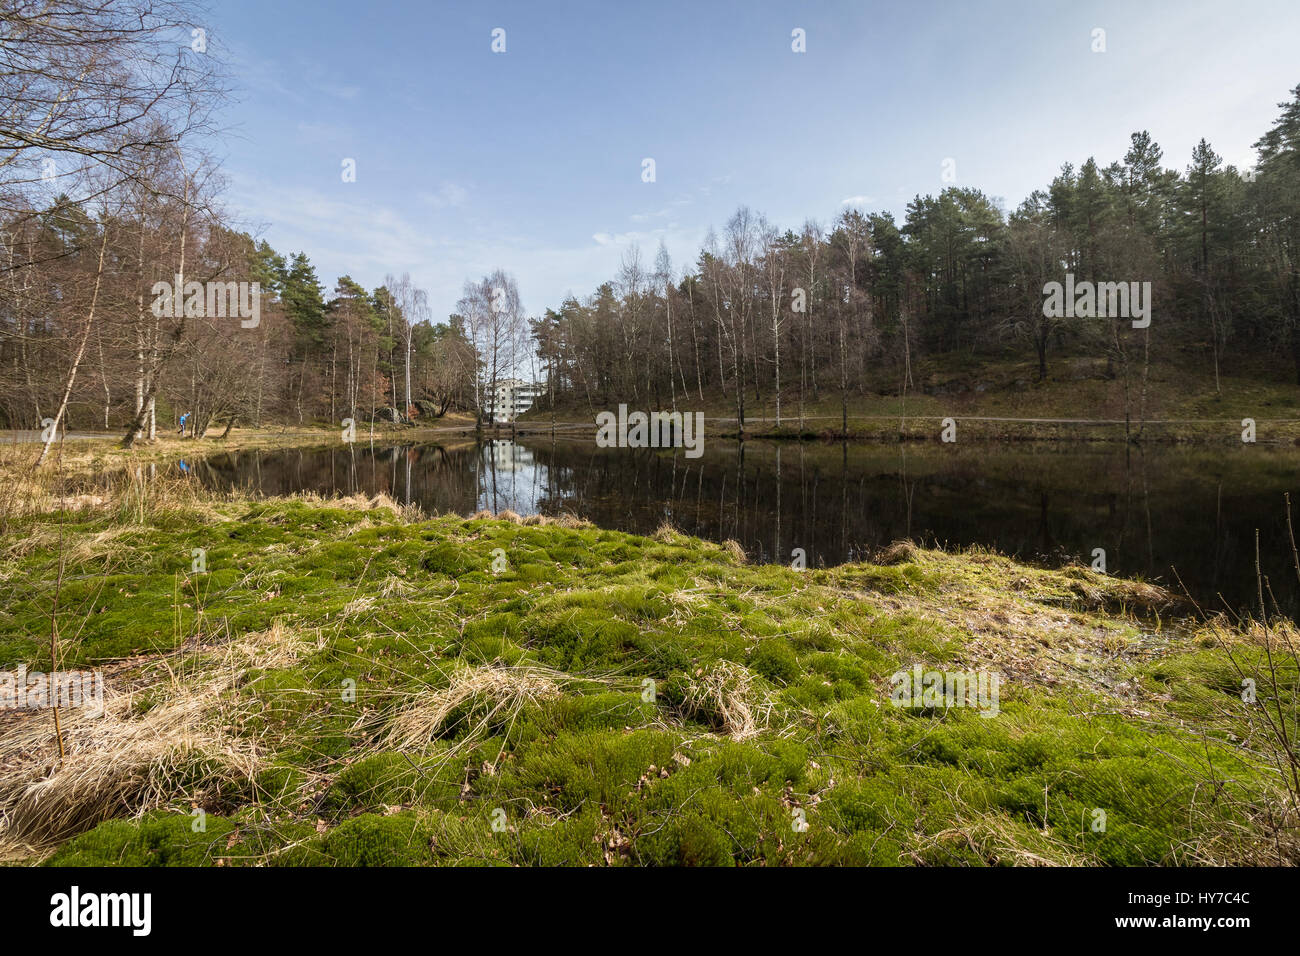 Svarttjern, a Frog and Toad pond in Baneheia in Kristiansand, Norway Stock Photo